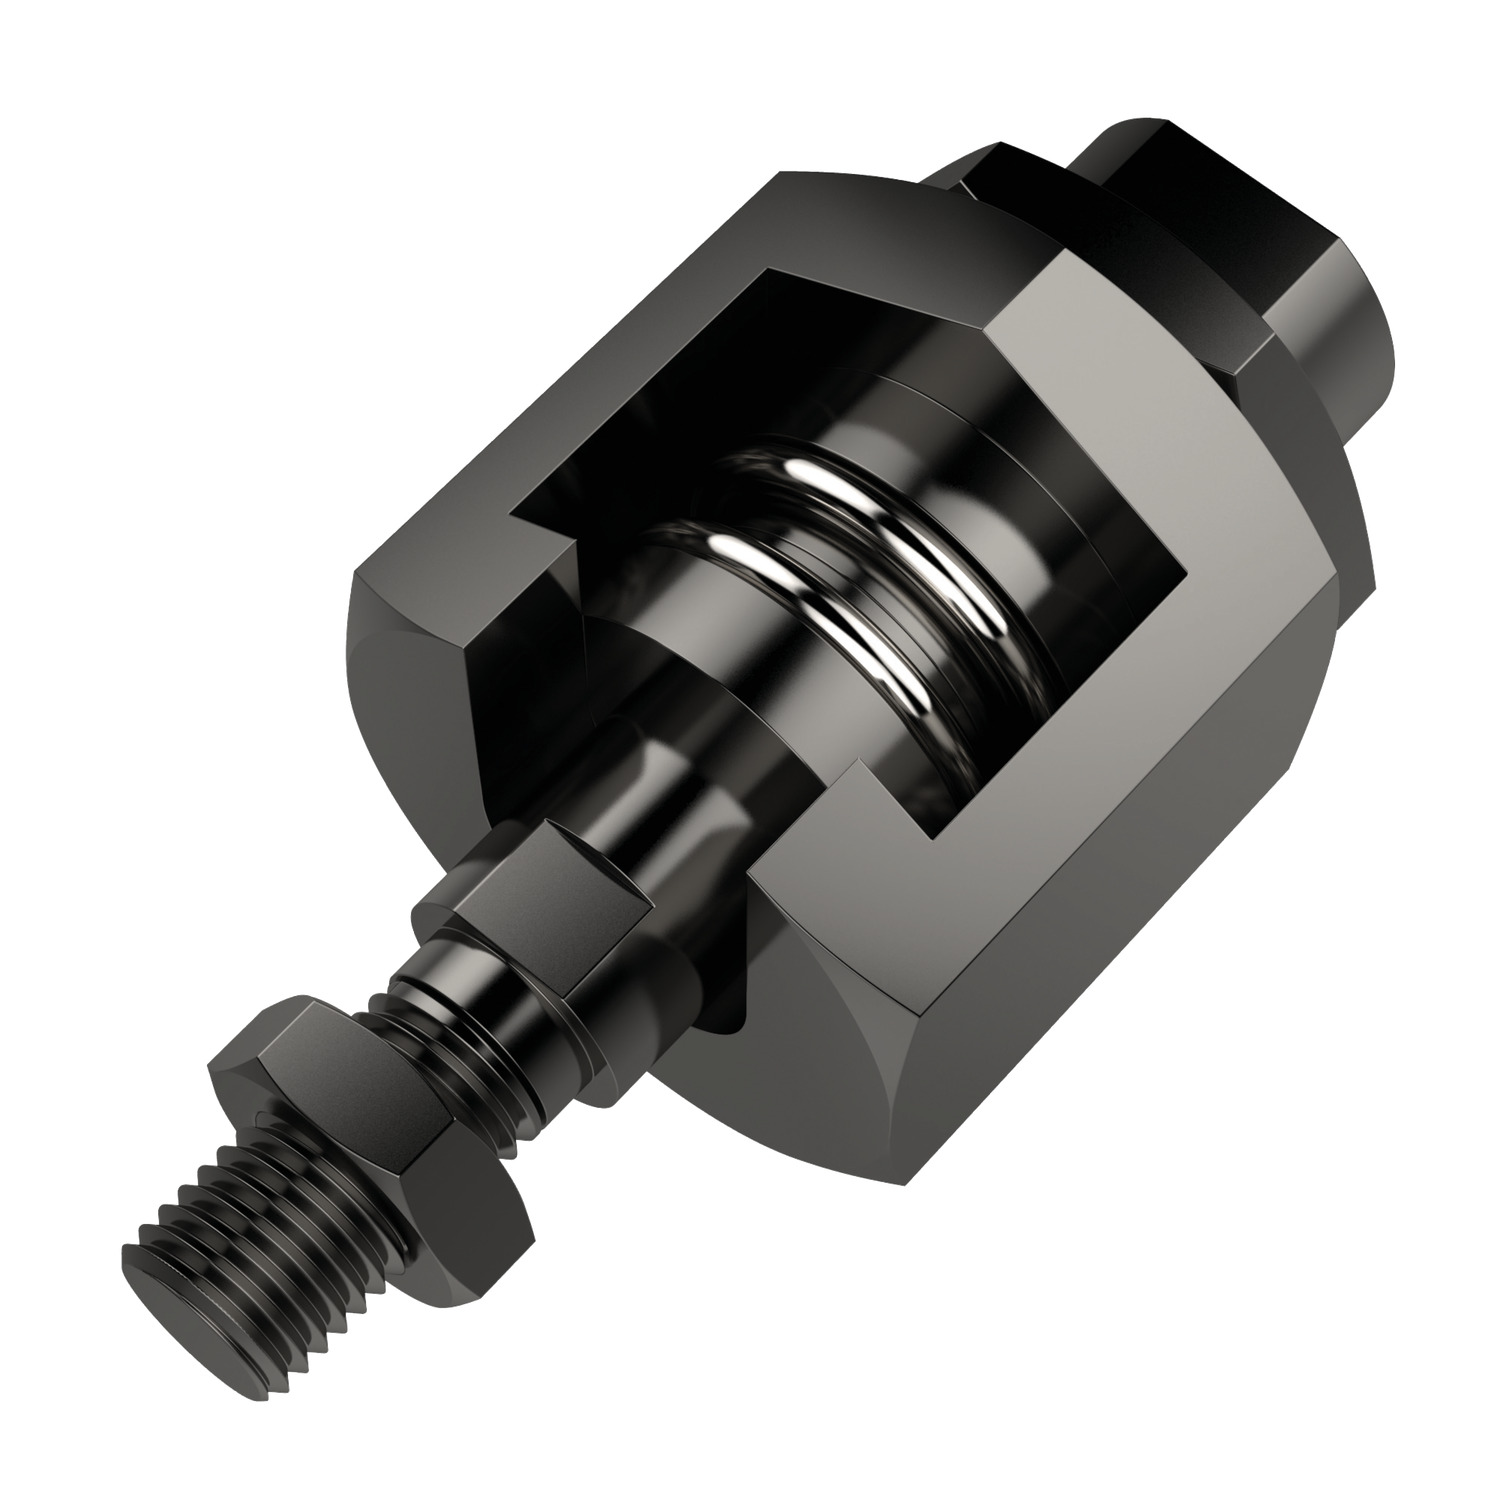 Quick Plug Couplings Quick plug coupling with in built compensation for both radial off-set and angular off-set between components. Ideal for applications with non-aligned linear components.